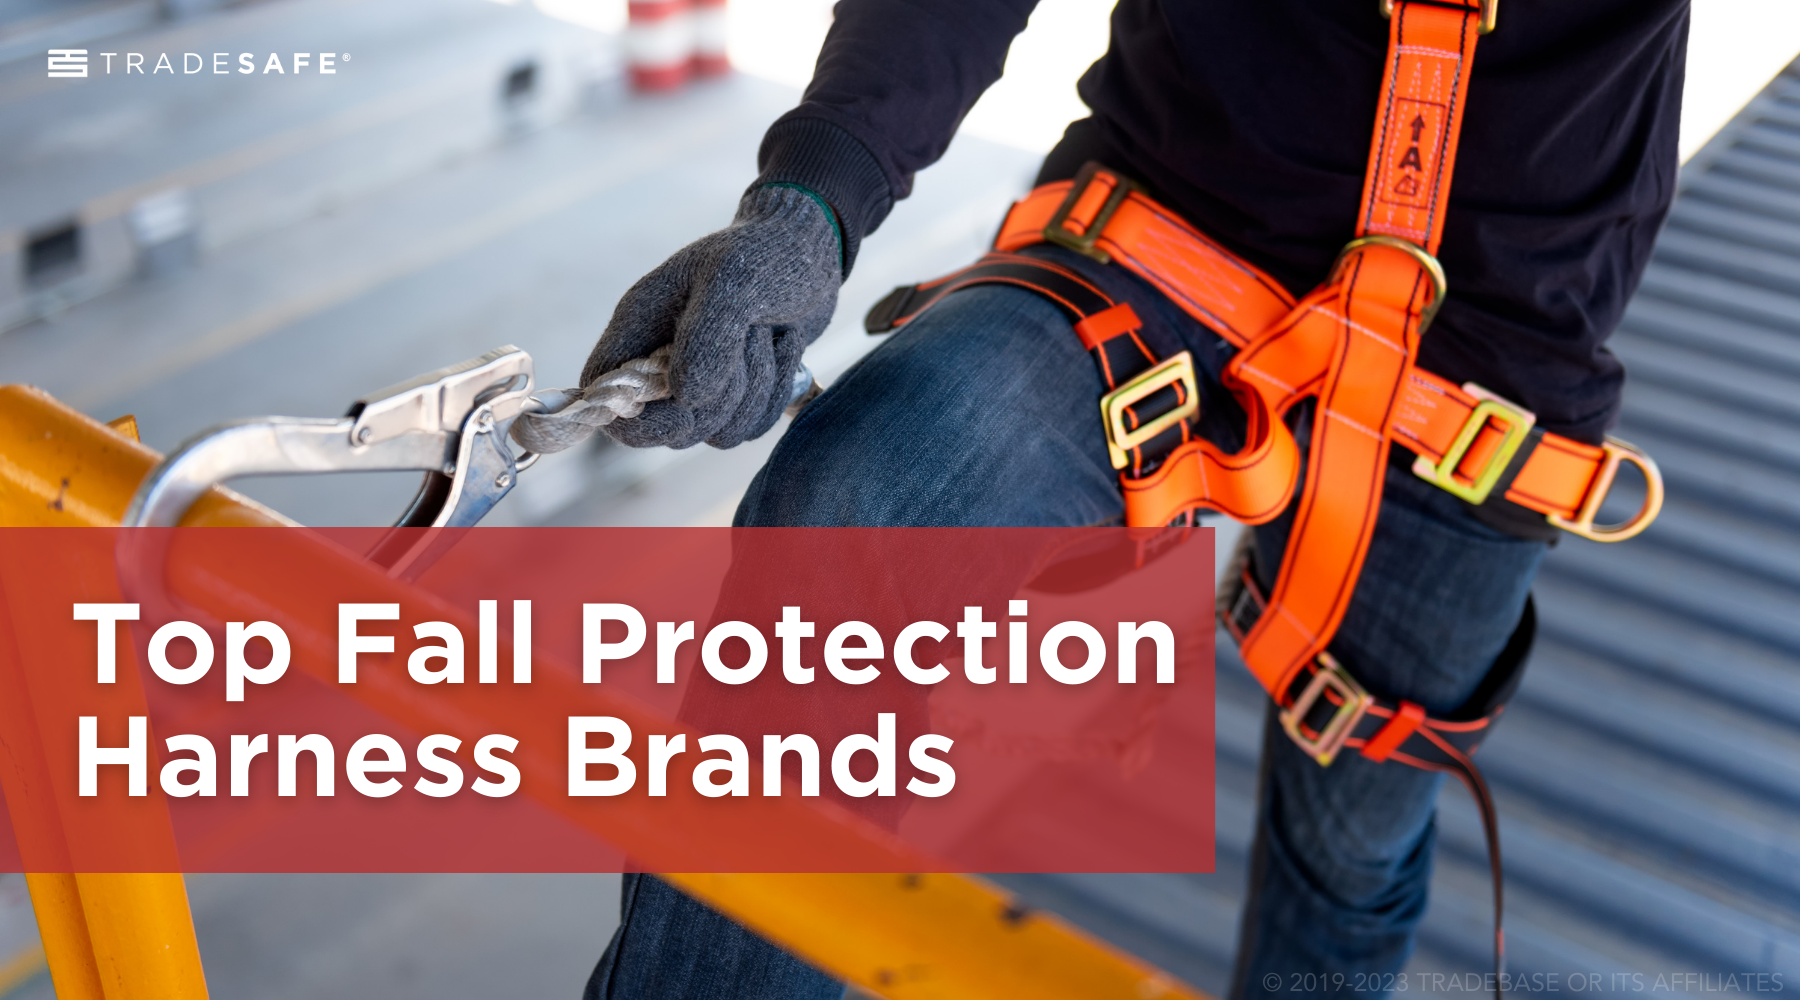 The Best Fall Protection Harness for Every Type of Workplace